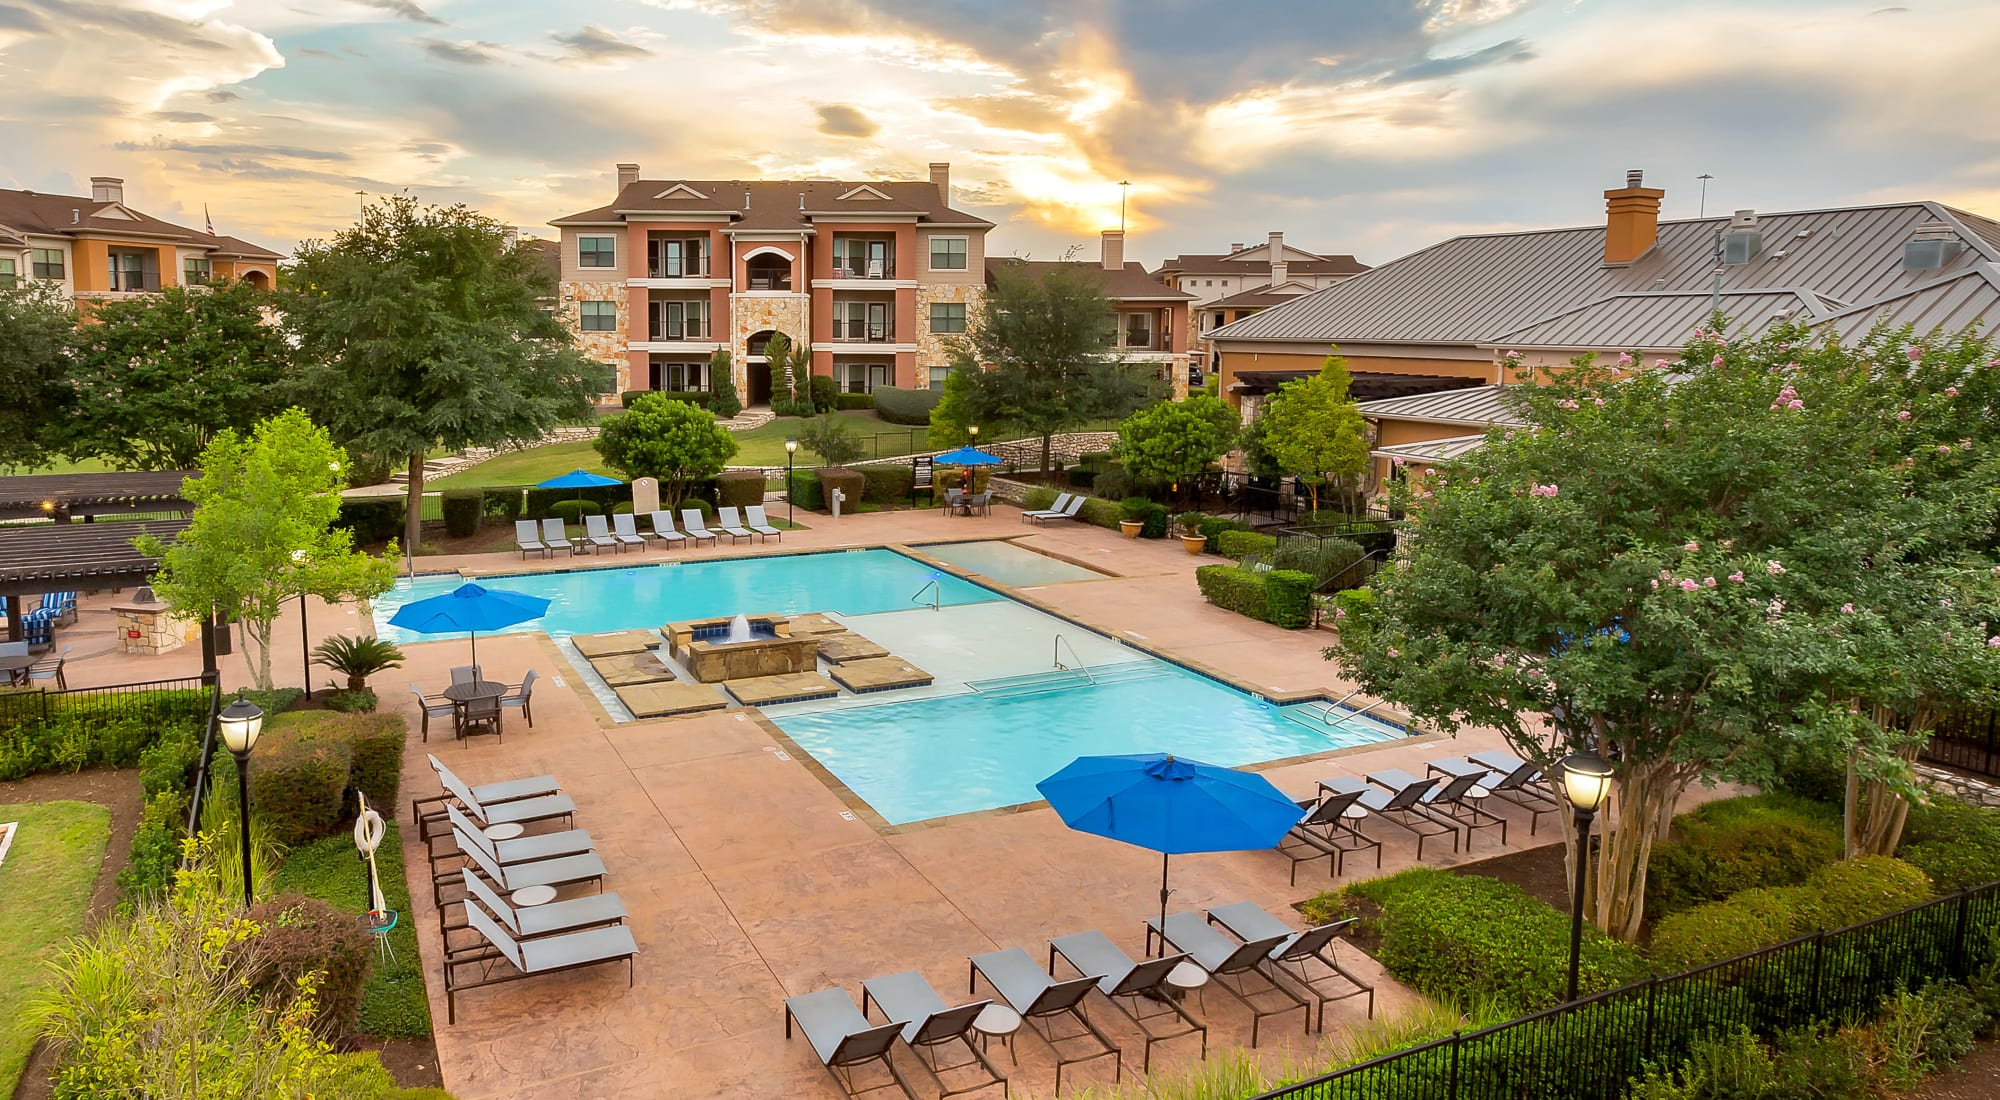 Lounge chairs around the pool at Onion Creek Luxury Apartments in Austin, Texas